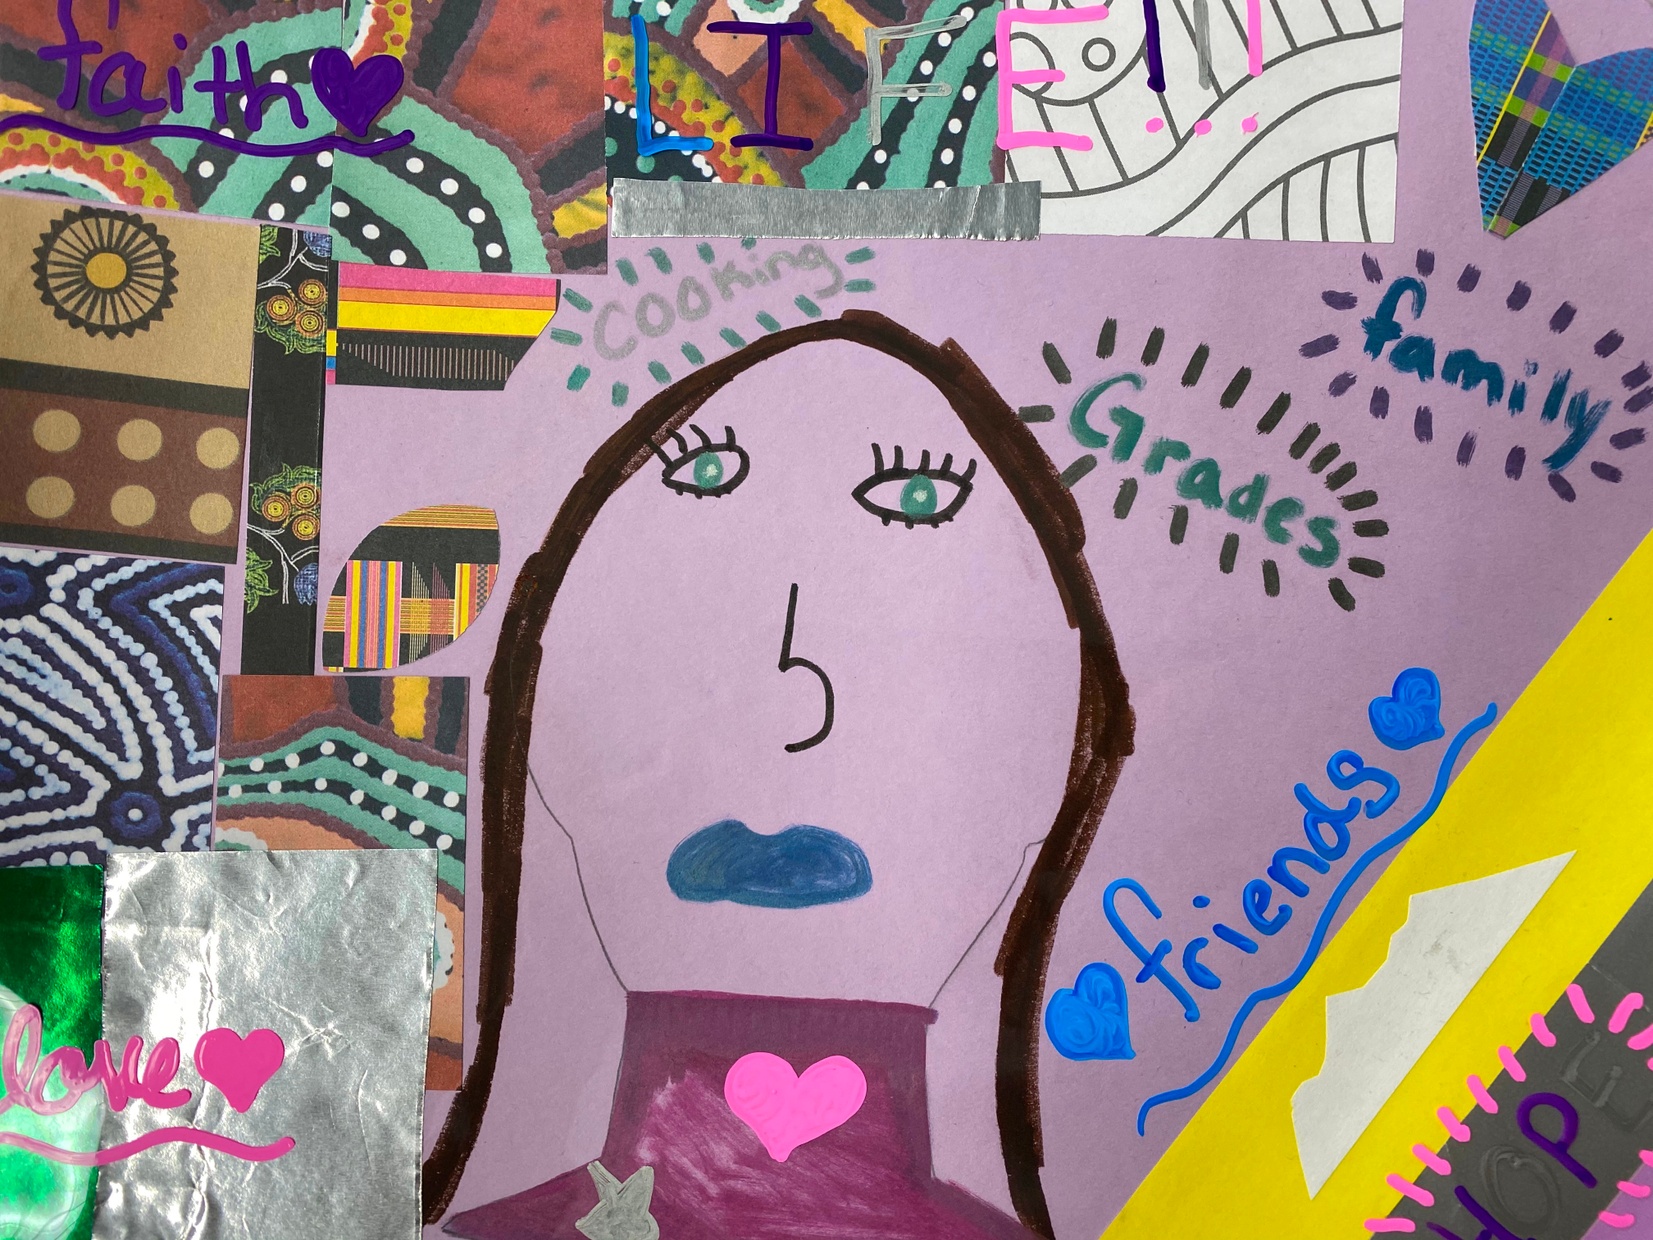 A collage with a self-portrait in the center and words and abstract shapes around the figure.